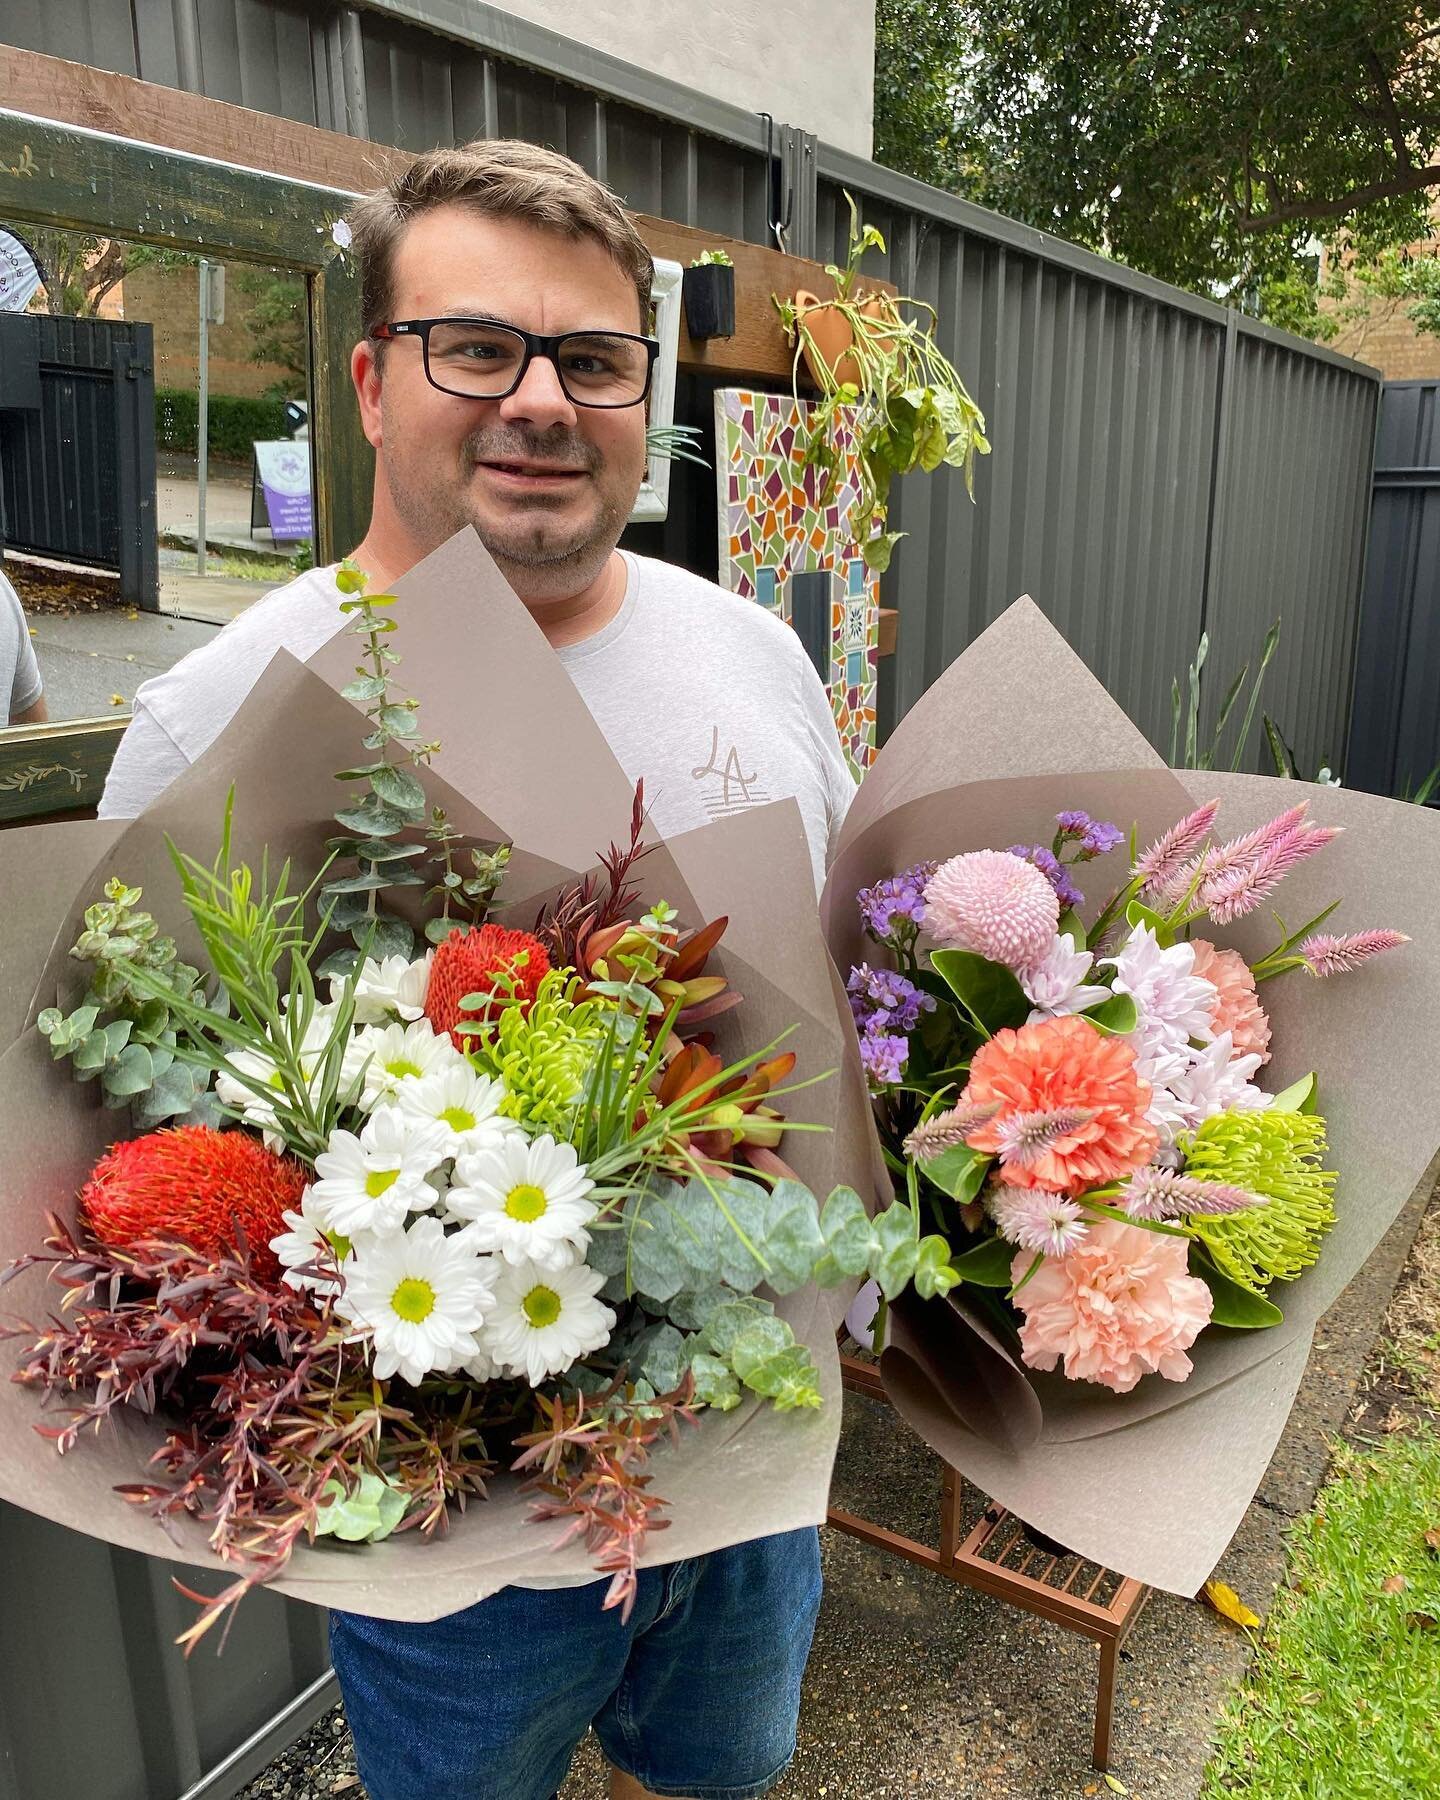 More deliveries heading out the door today!
#newcastleflorist #ndissupport #supportedemployment #newcastlebusinesses